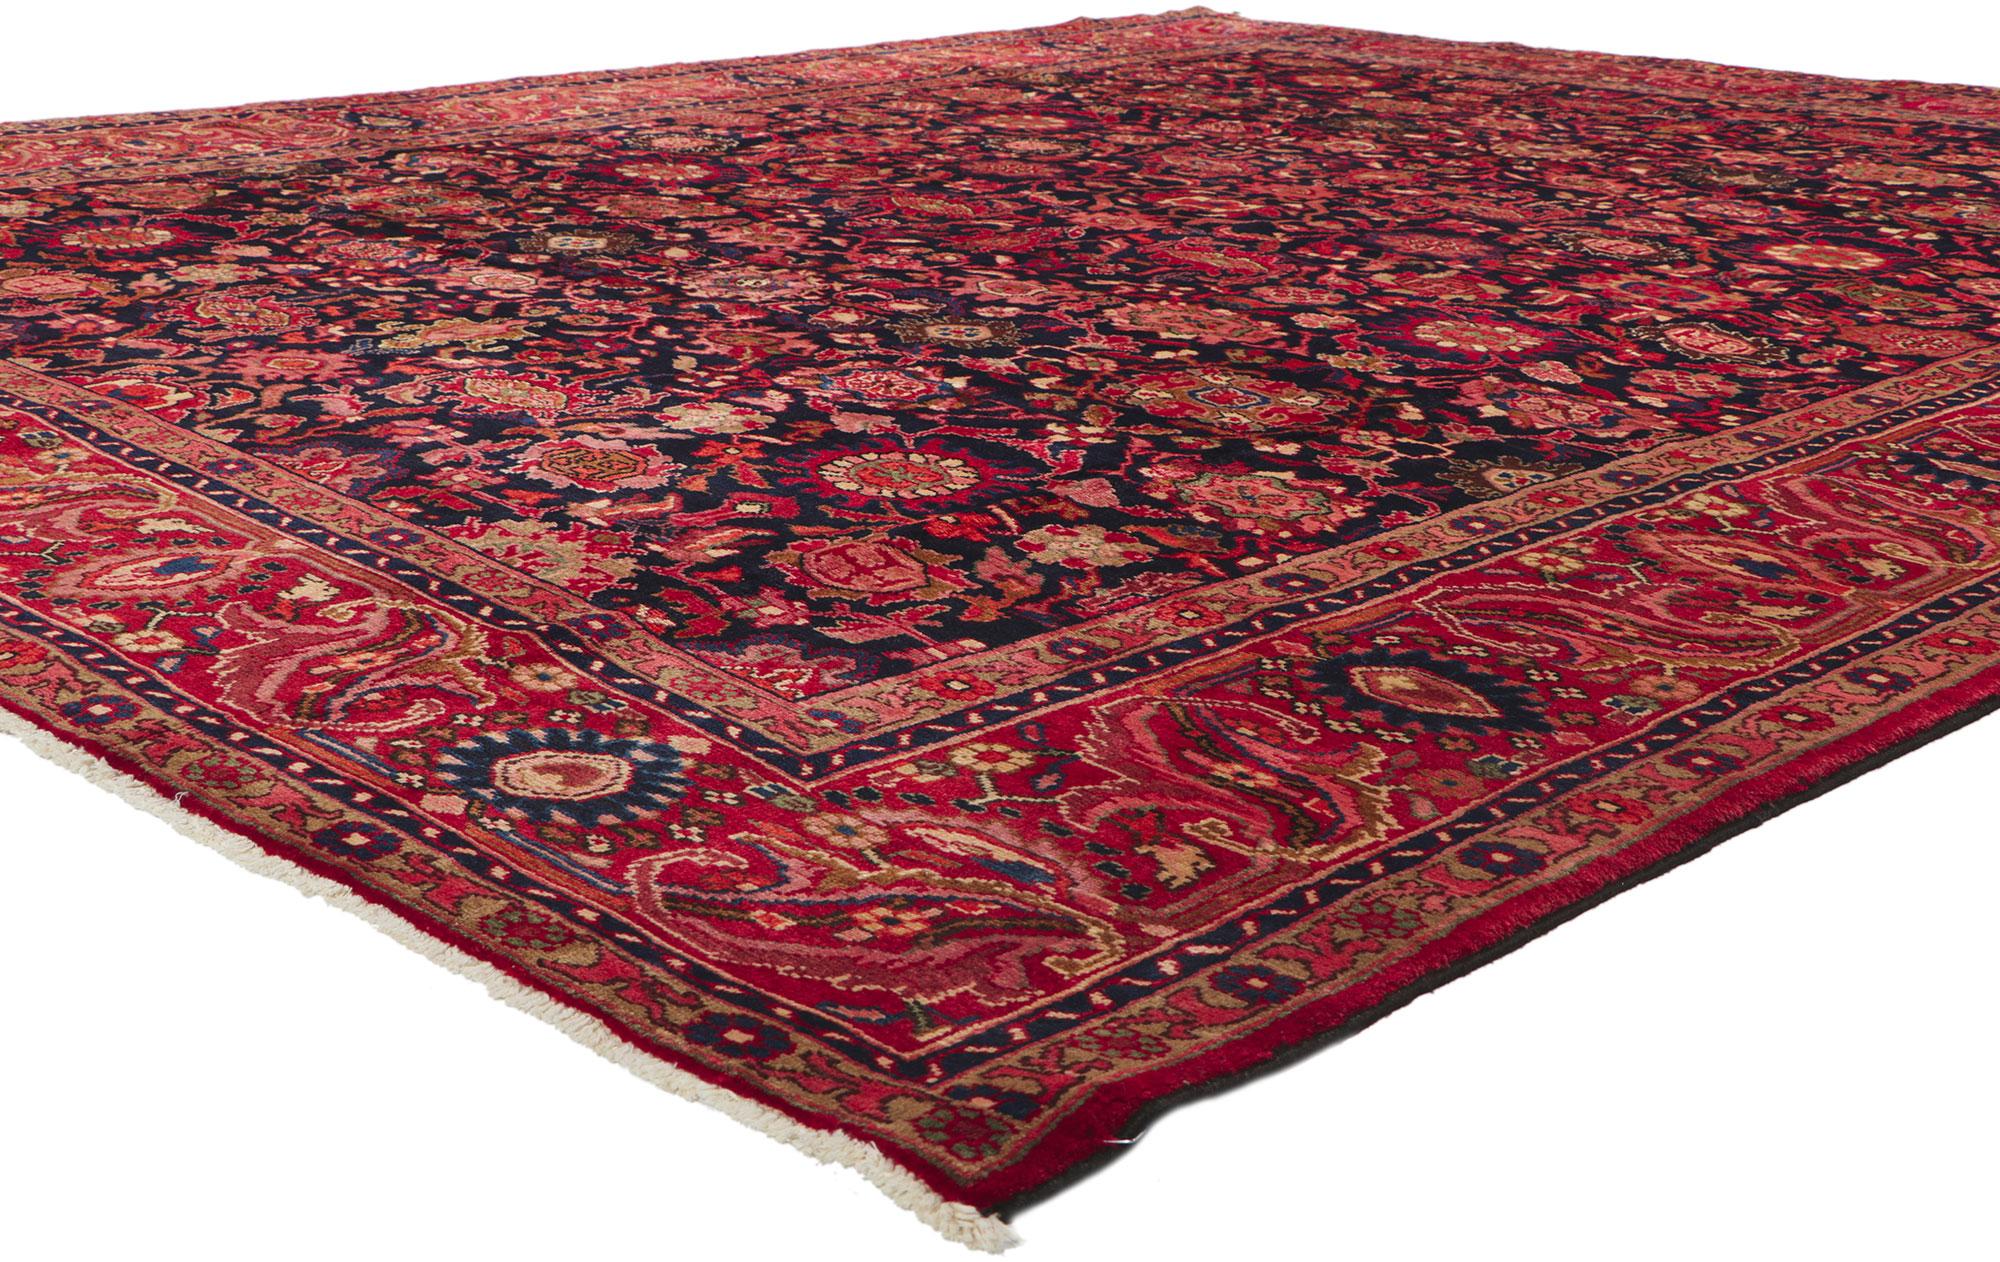 61116 Vintage Persian Malayer Rug, 09'09 x 11'11. Emanating a timeless design and beguiling beauty in saturated colors, this hand-knotted wool vintage Persian Malayer rug is poised to impress. An allover repeating botanical pattern spread across the